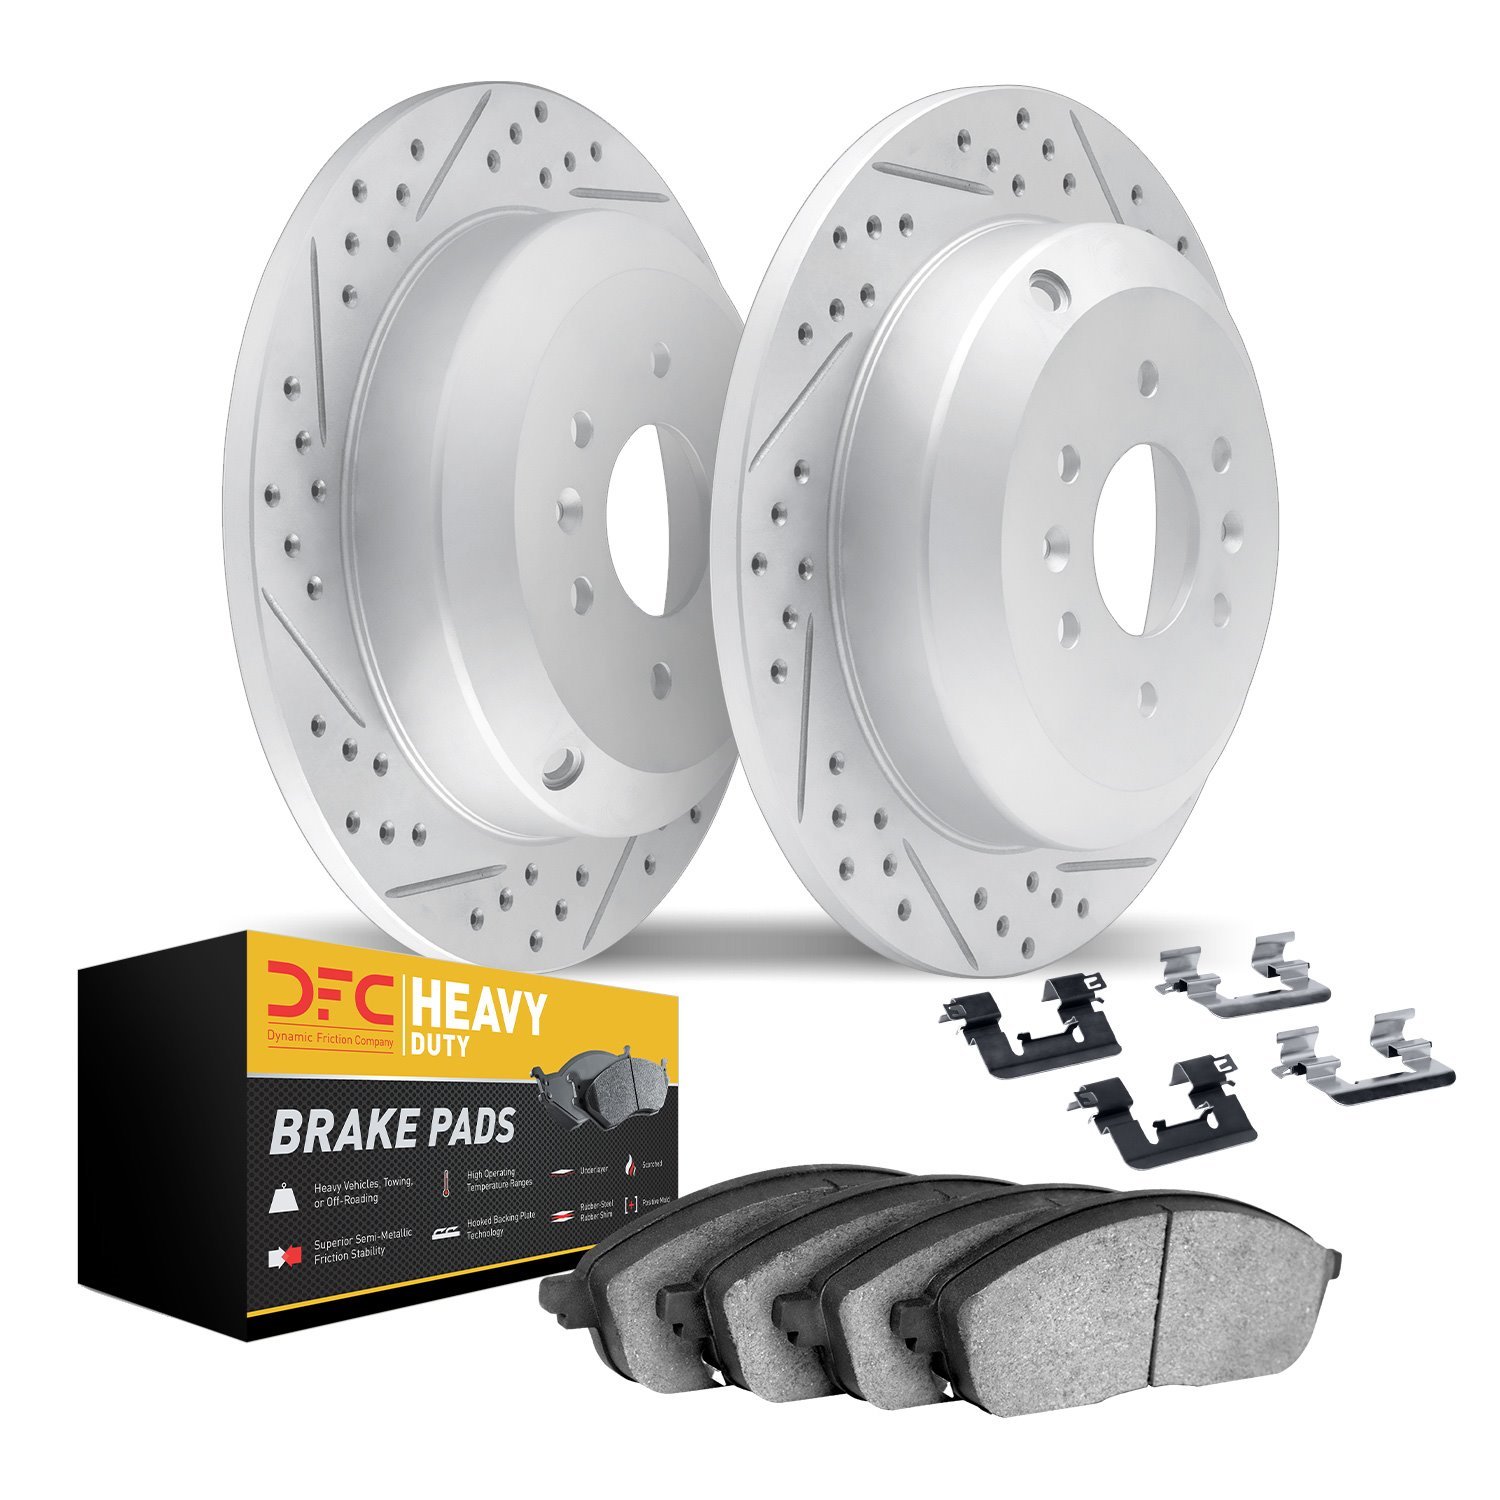 2212-99193 Geoperformance Drilled/Slotted Rotors w/Heavy-Duty Pads Kit & Hardware, 2015-2019 Ford/Lincoln/Mercury/Mazda, Positio